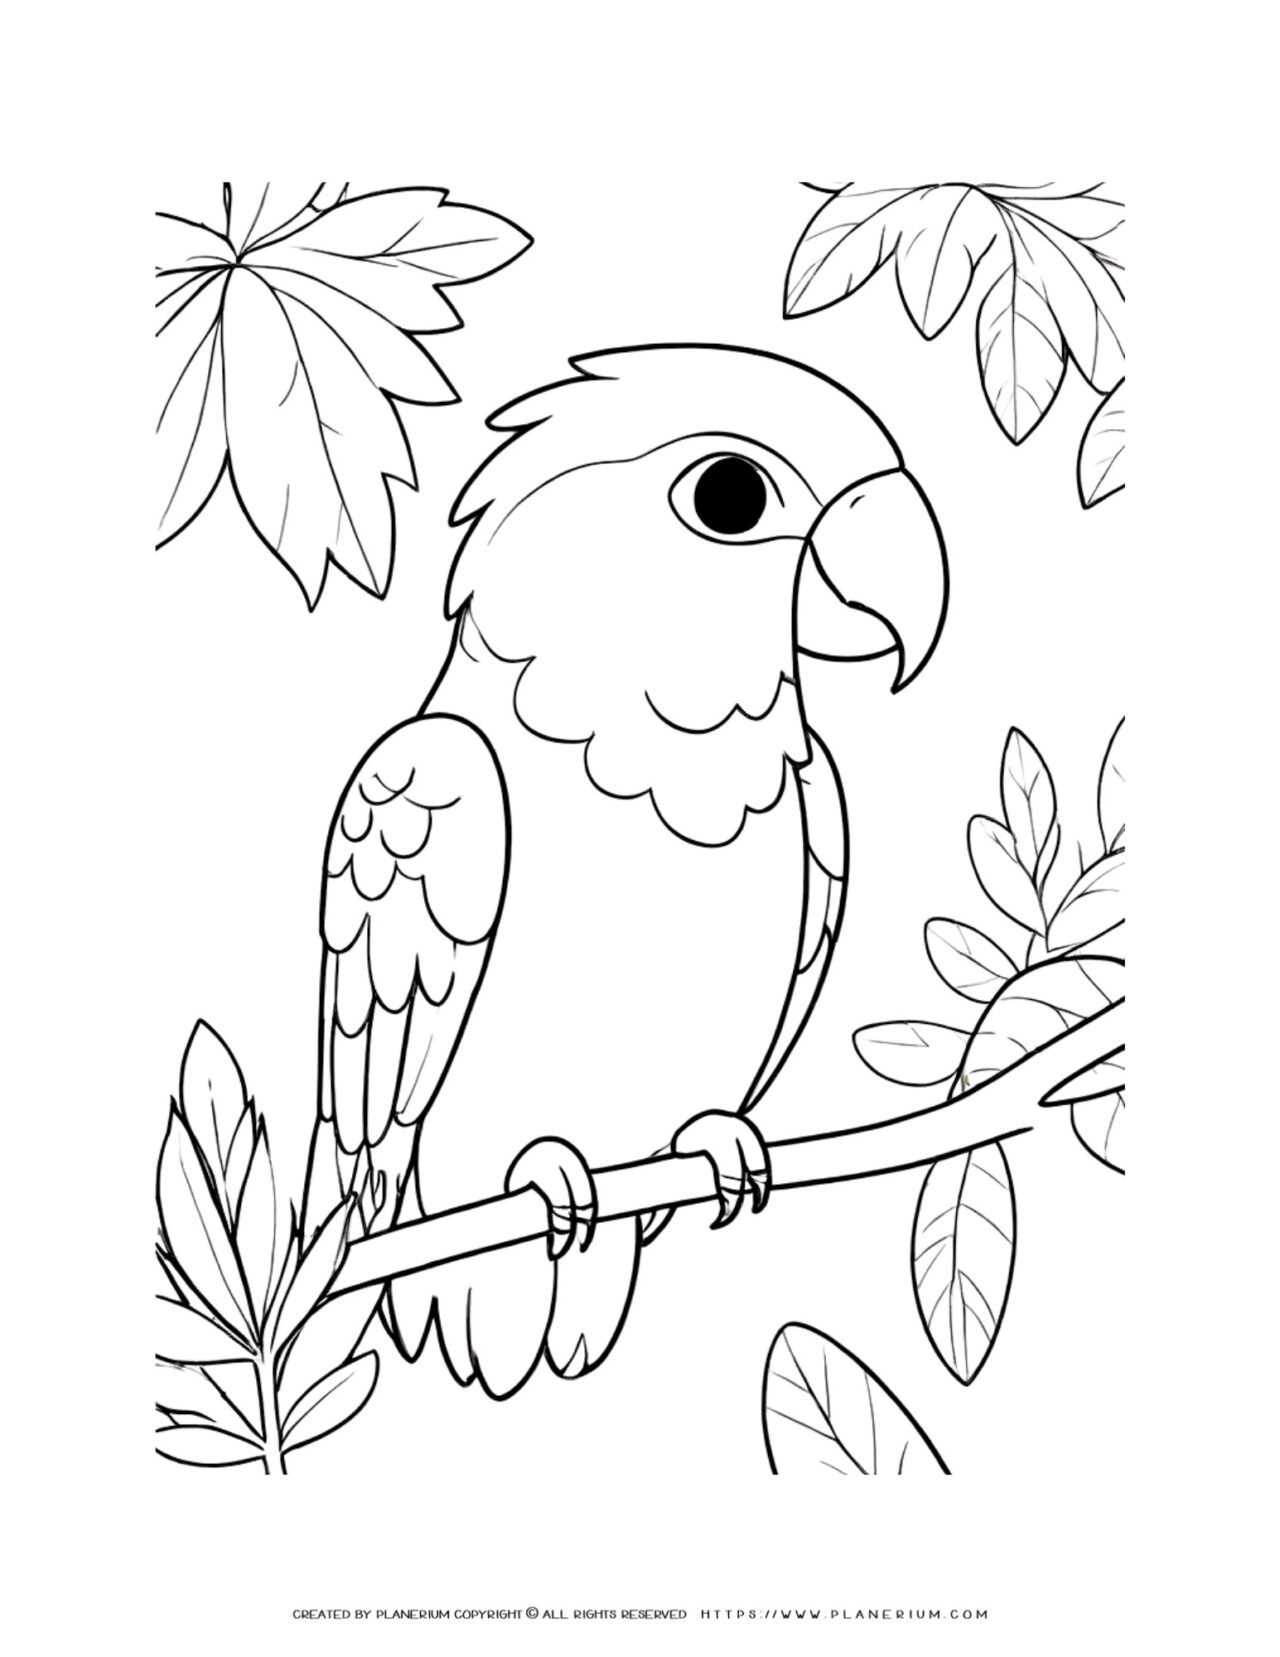 Elegant-Parrot-Resting-on-Branch-Realistic-Bird-Coloring